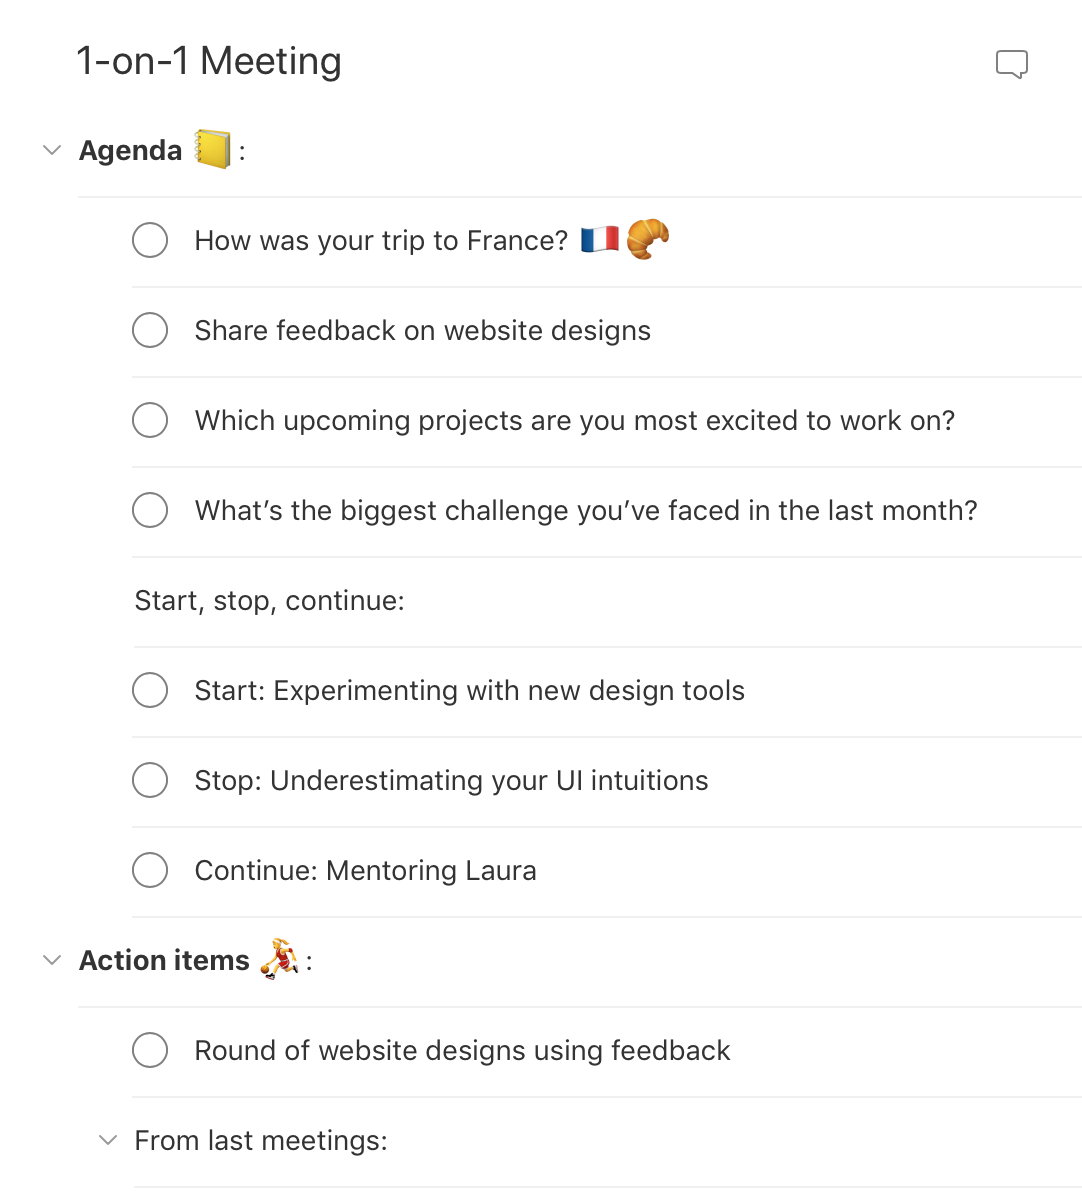 221-on-221 Meeting - Templates  Todoist Intended For One One One Meeting Template